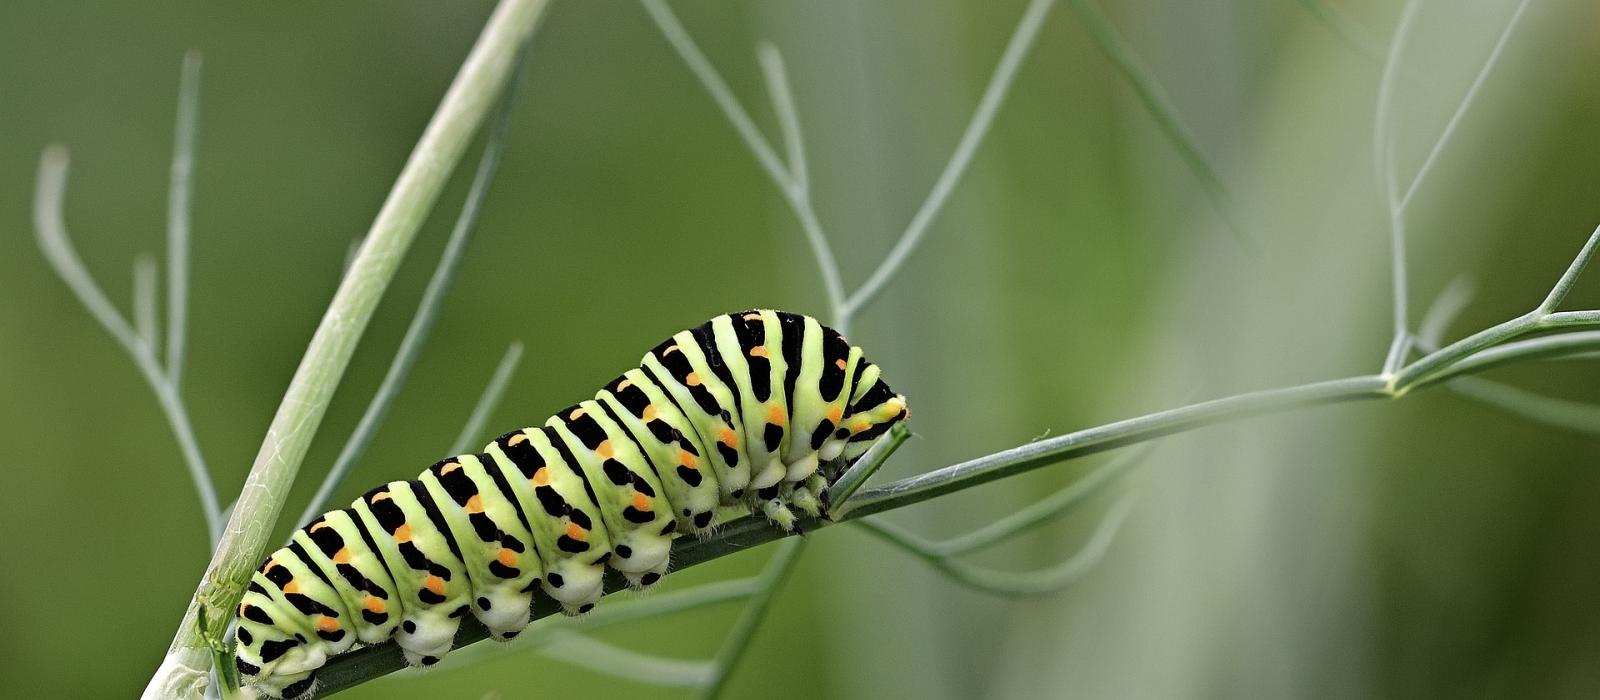 A green and black-striped caterpillar crawling on a stem